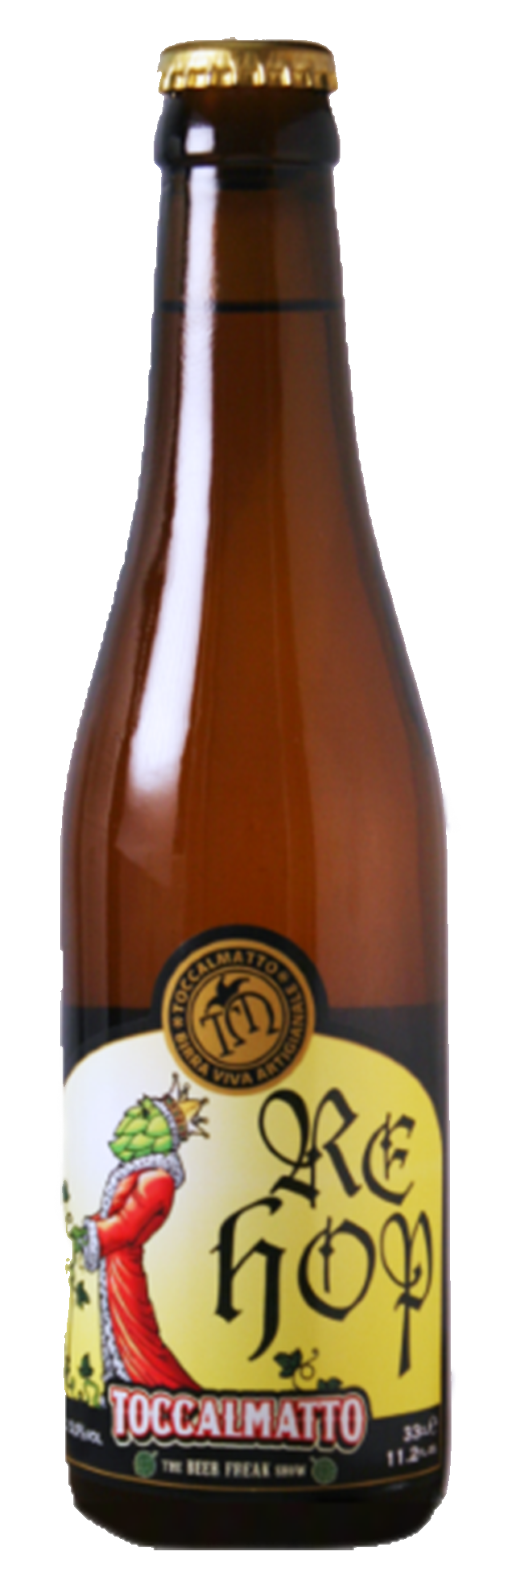 Product image of Re Hop Toccalmatto